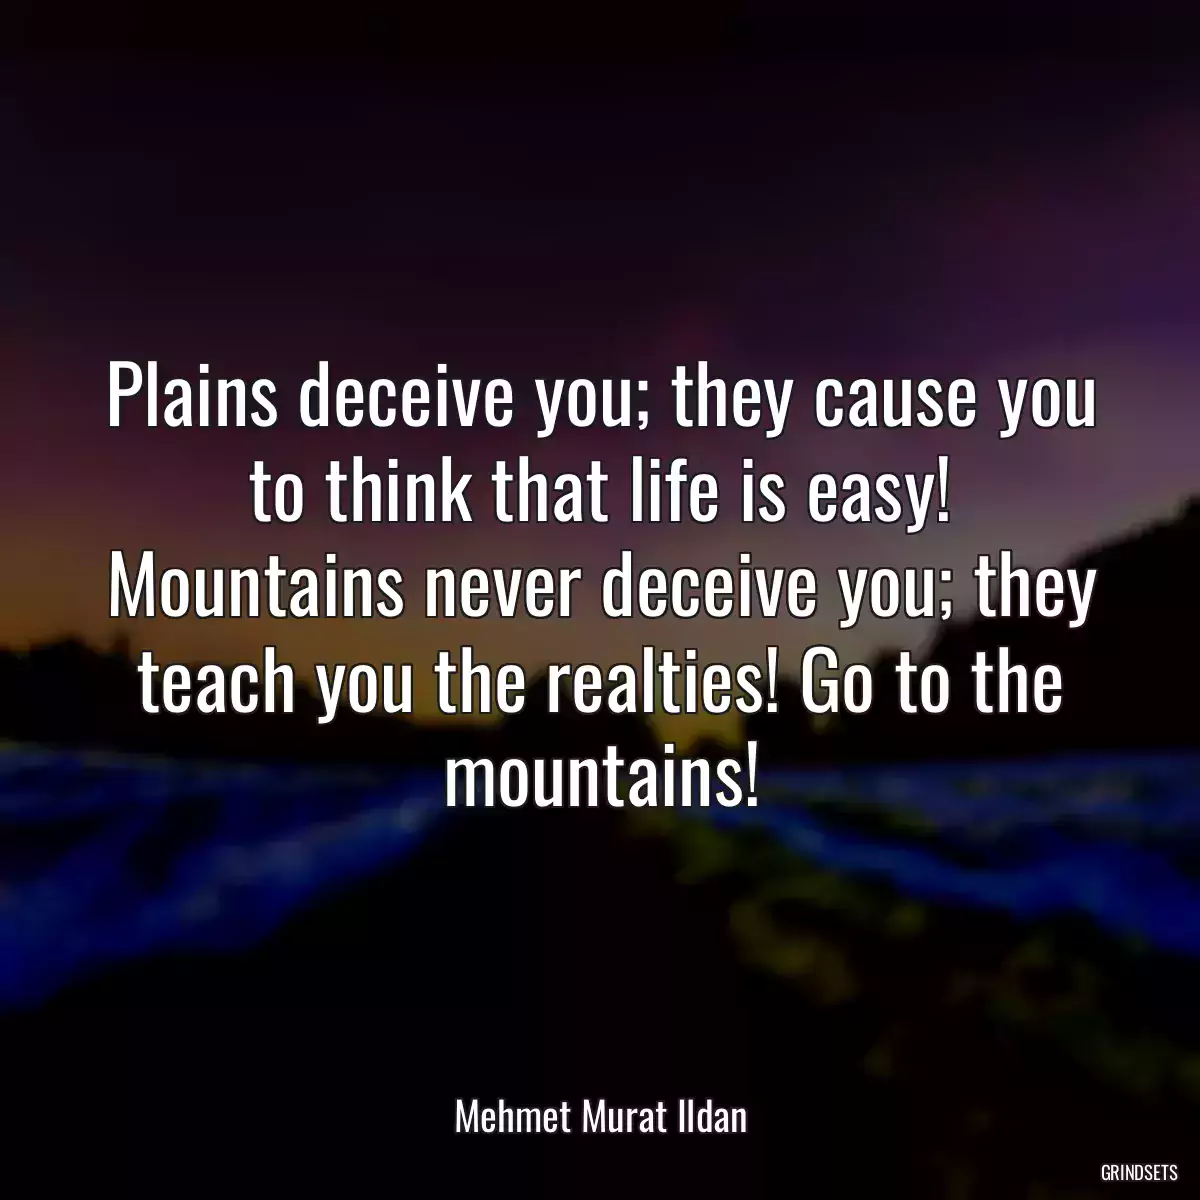 Plains deceive you; they cause you to think that life is easy! Mountains never deceive you; they teach you the realties! Go to the mountains!